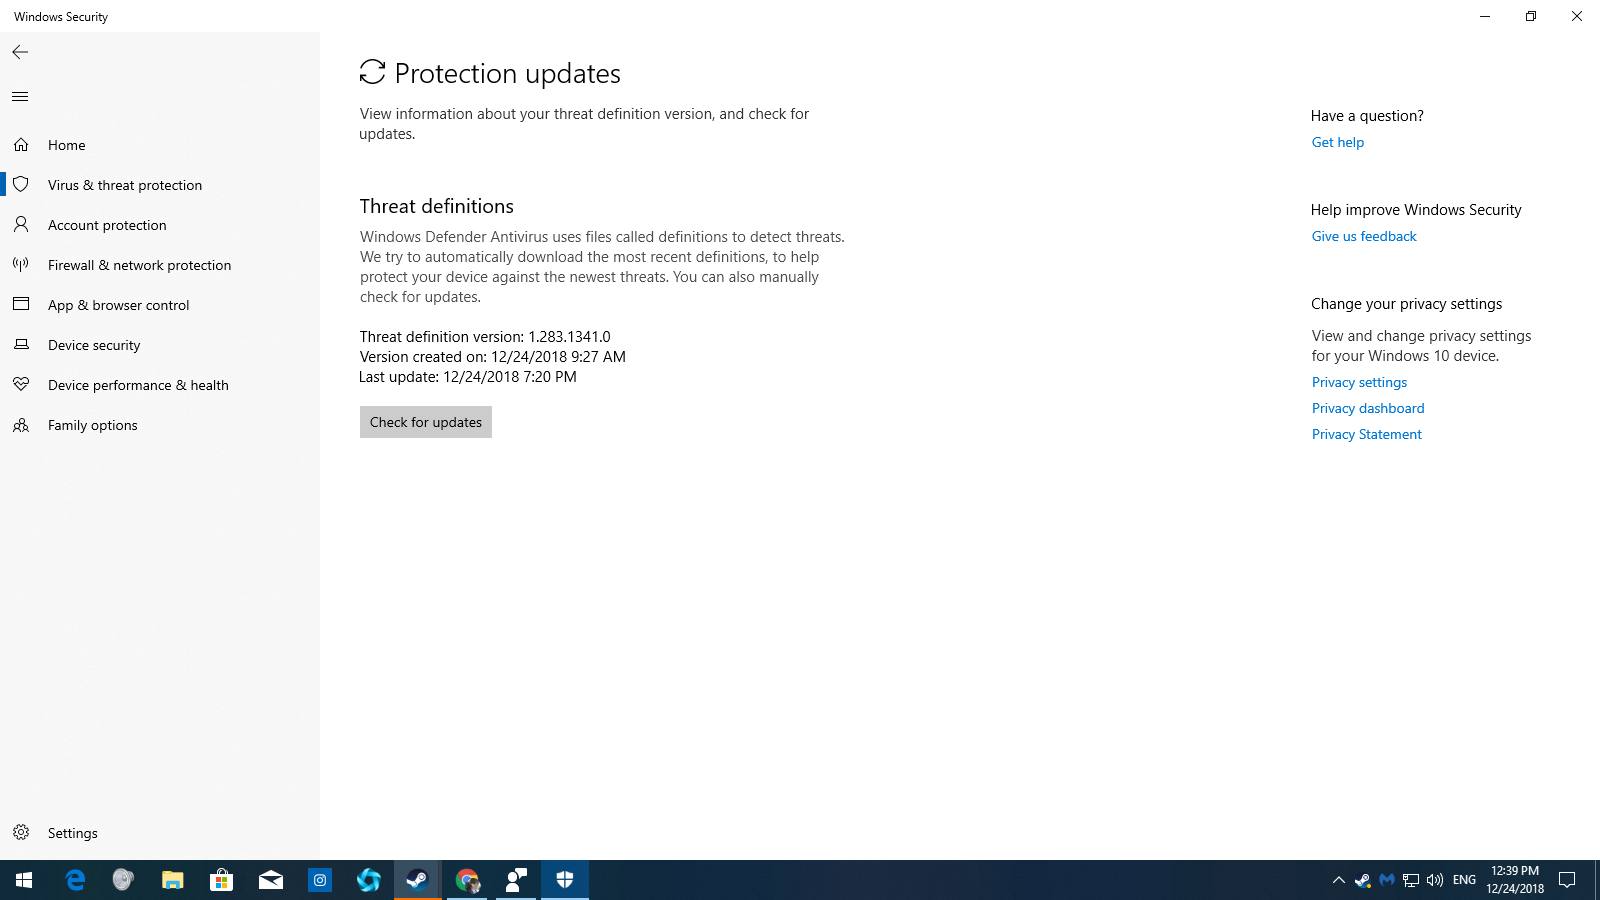 Windows 10 Defender show wrong time ac80dac0-1b19-4d6f-9417-7dc028147346?upload=true.png